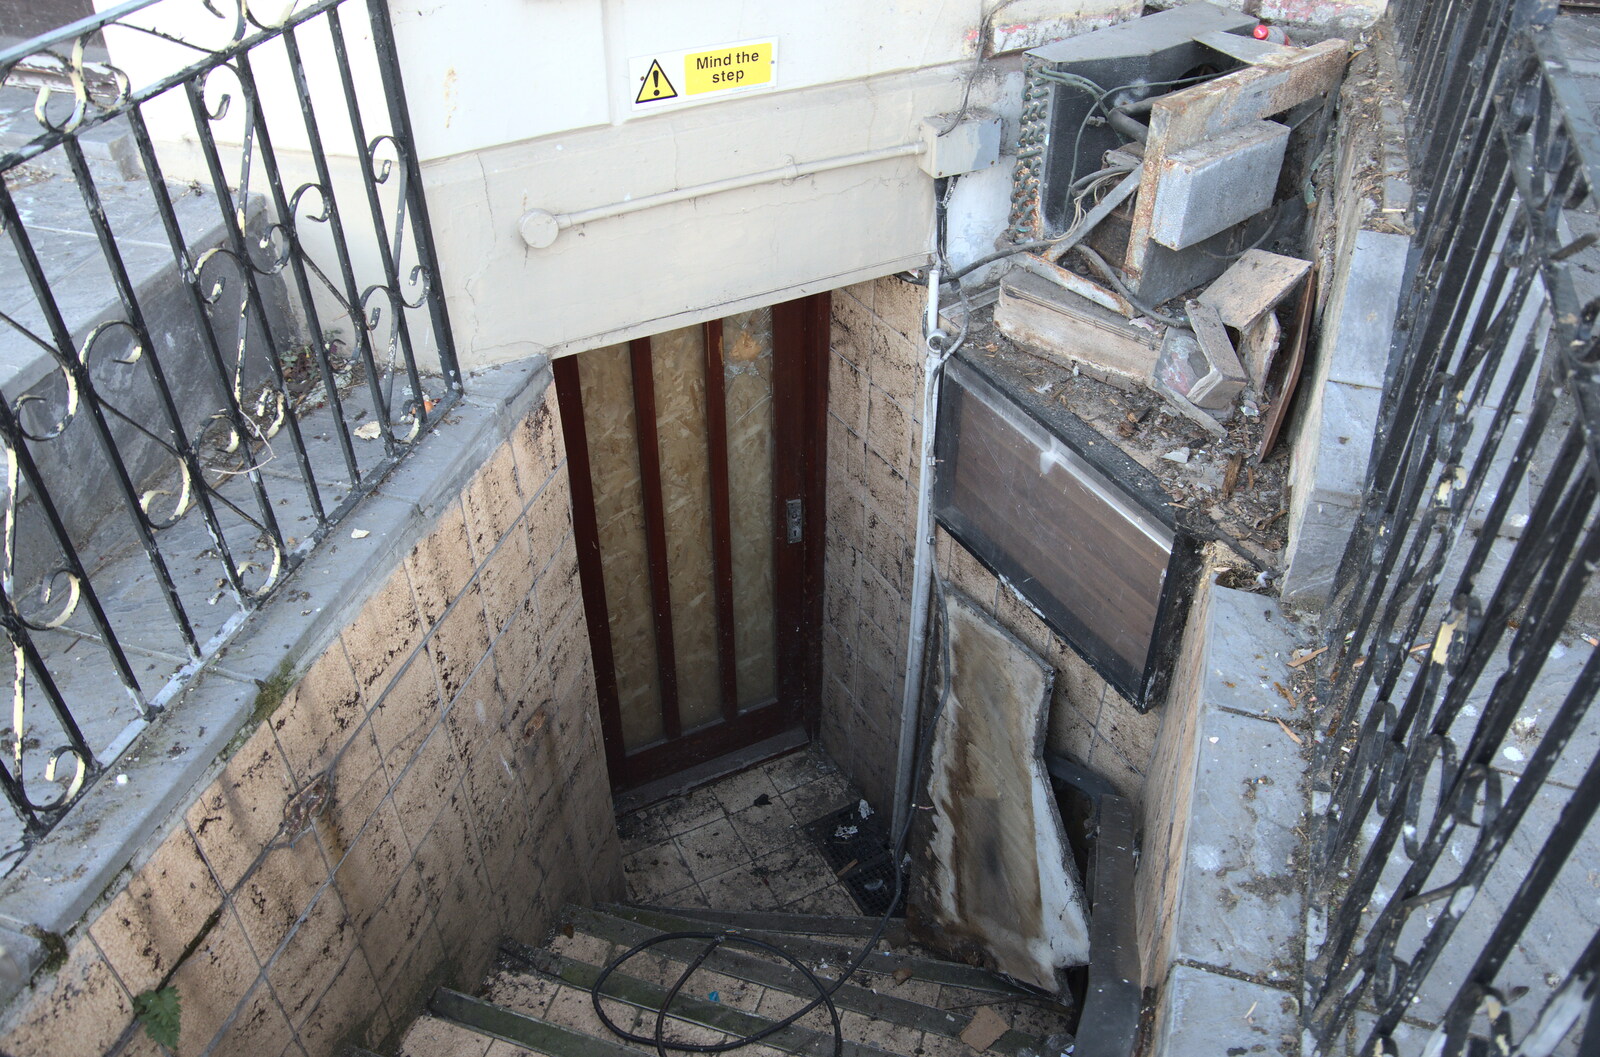 A derelict basement entrance from Faded Seaside Glamour: A Weekend in Great Yarmouth, Norfolk - 29th May 2022